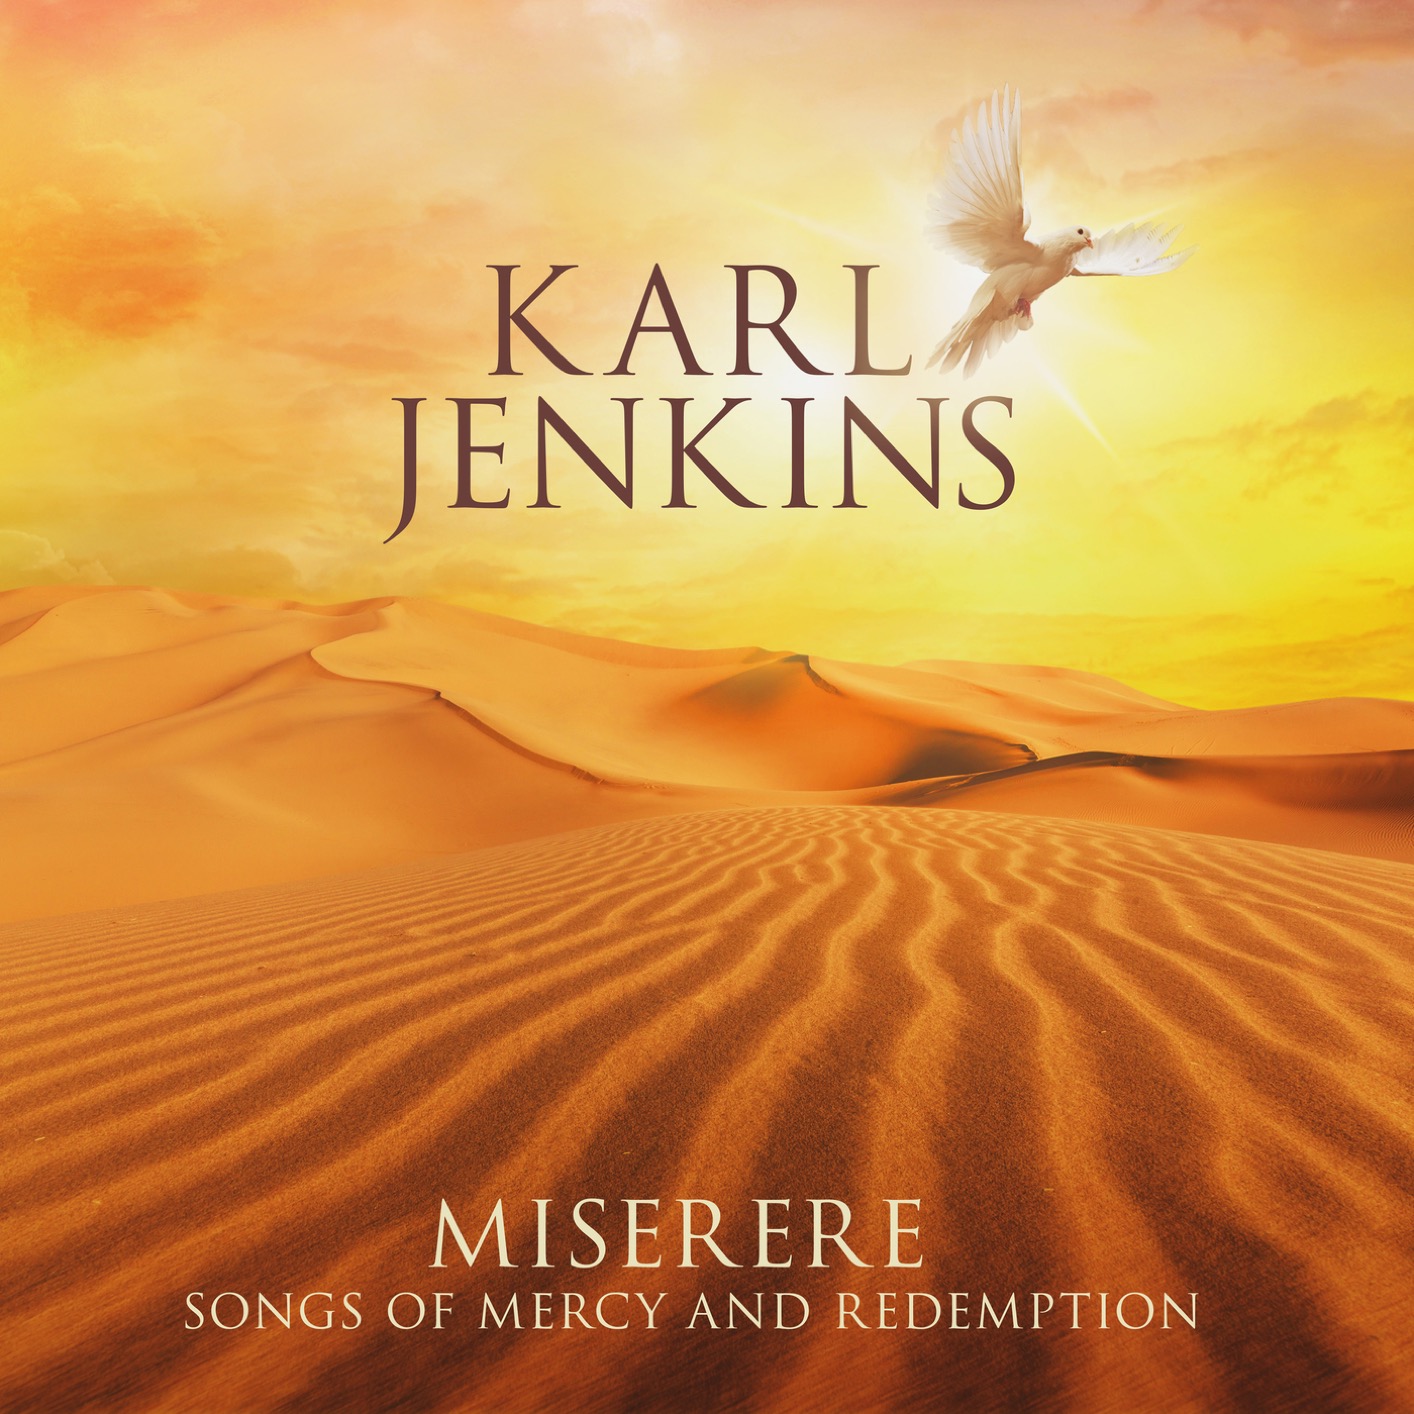 Karl Jenkins - Miserere: Songs of Mercy and Redemption (2019) [FLAC 24bit/48kHz]